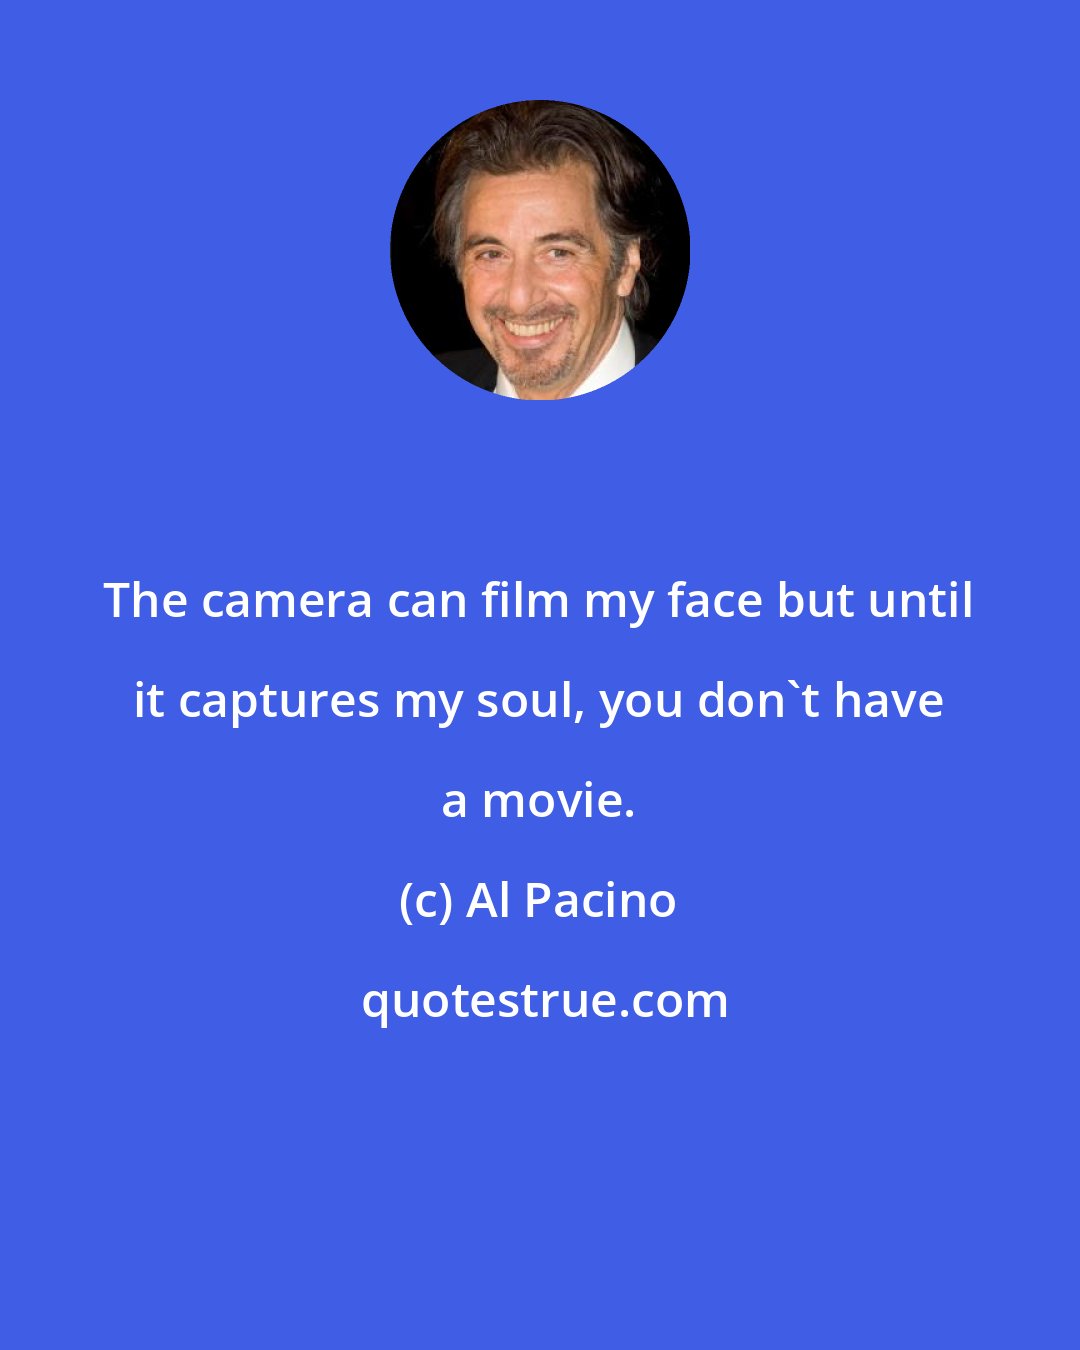 Al Pacino: The camera can film my face but until it captures my soul, you don't have a movie.